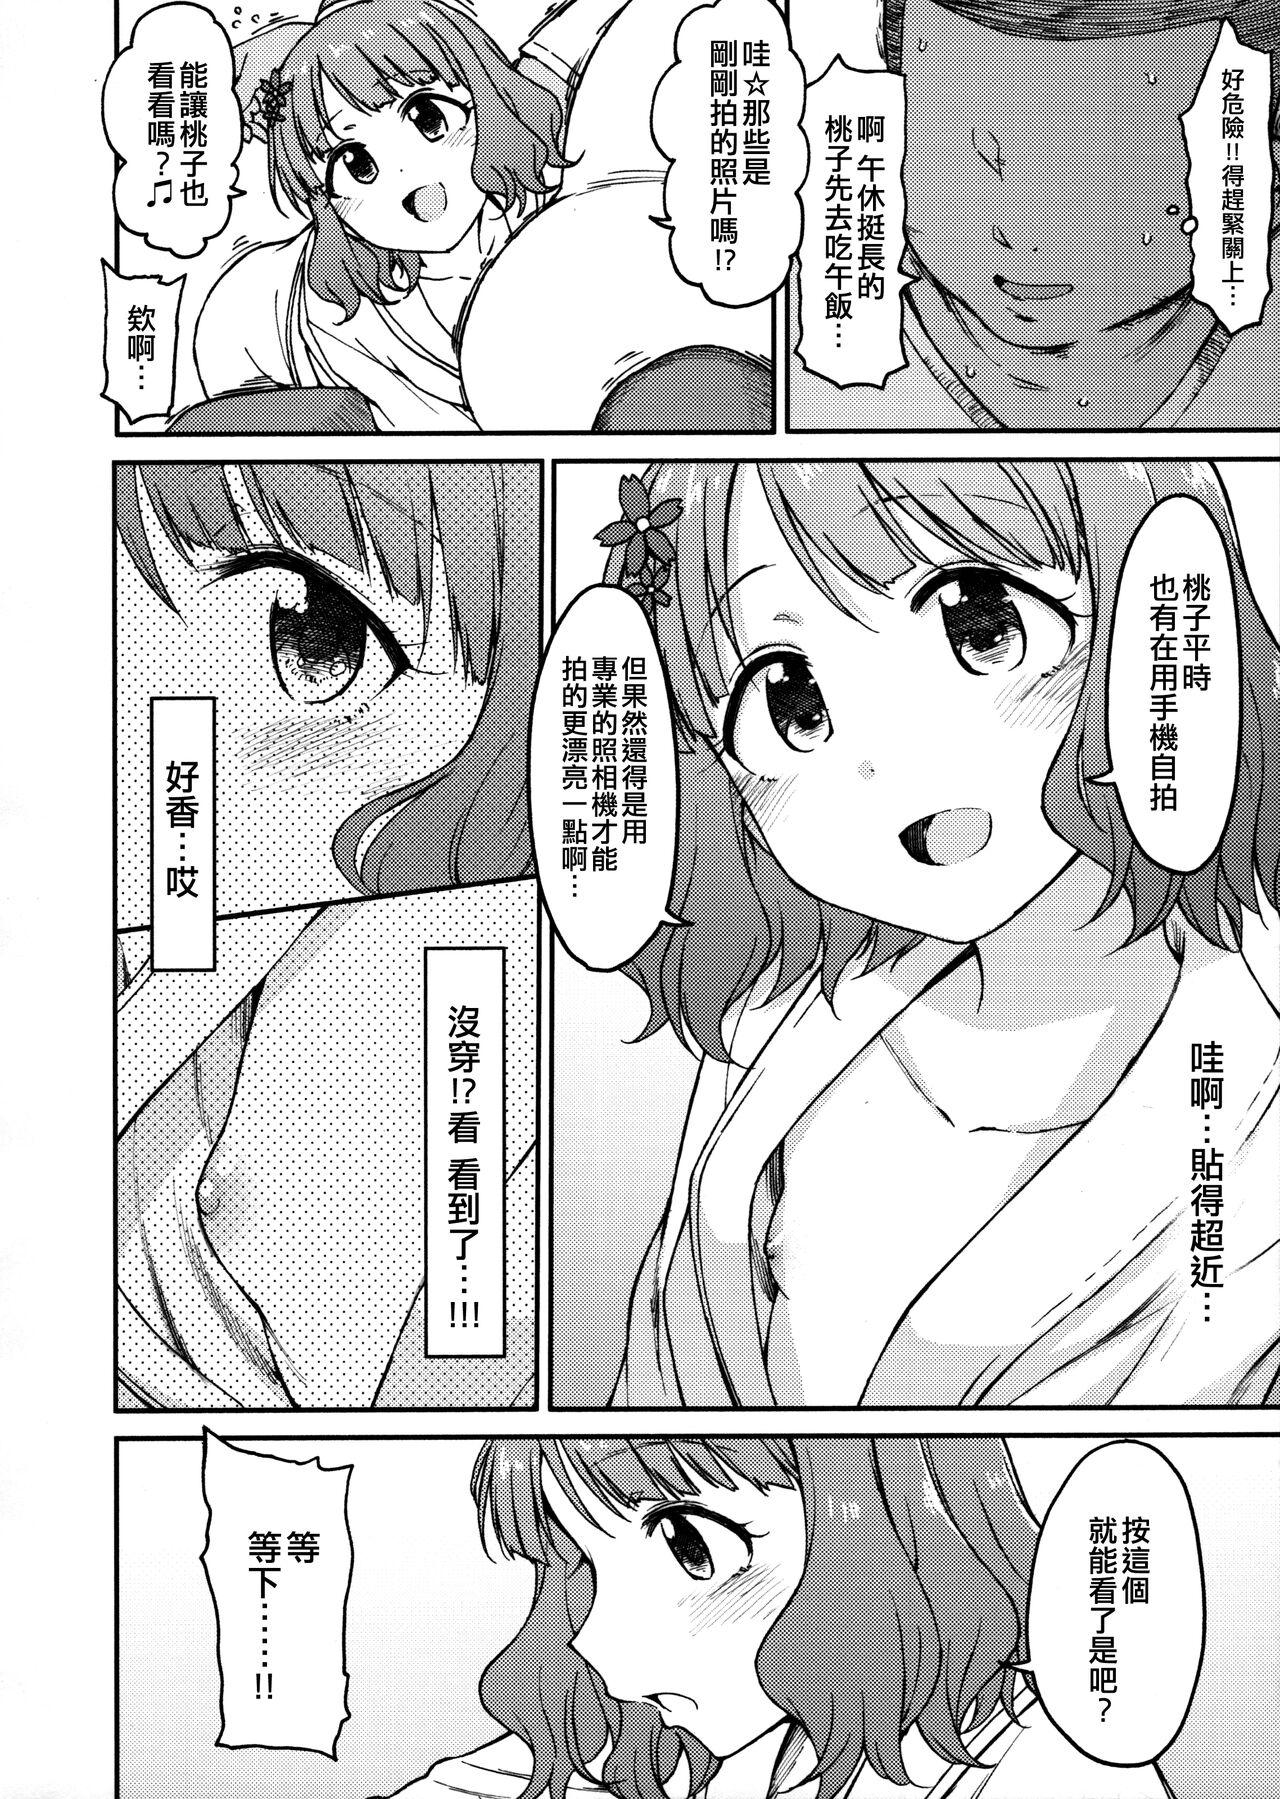 Fun Candy Wrapper - The idolmaster Panty - Page 11